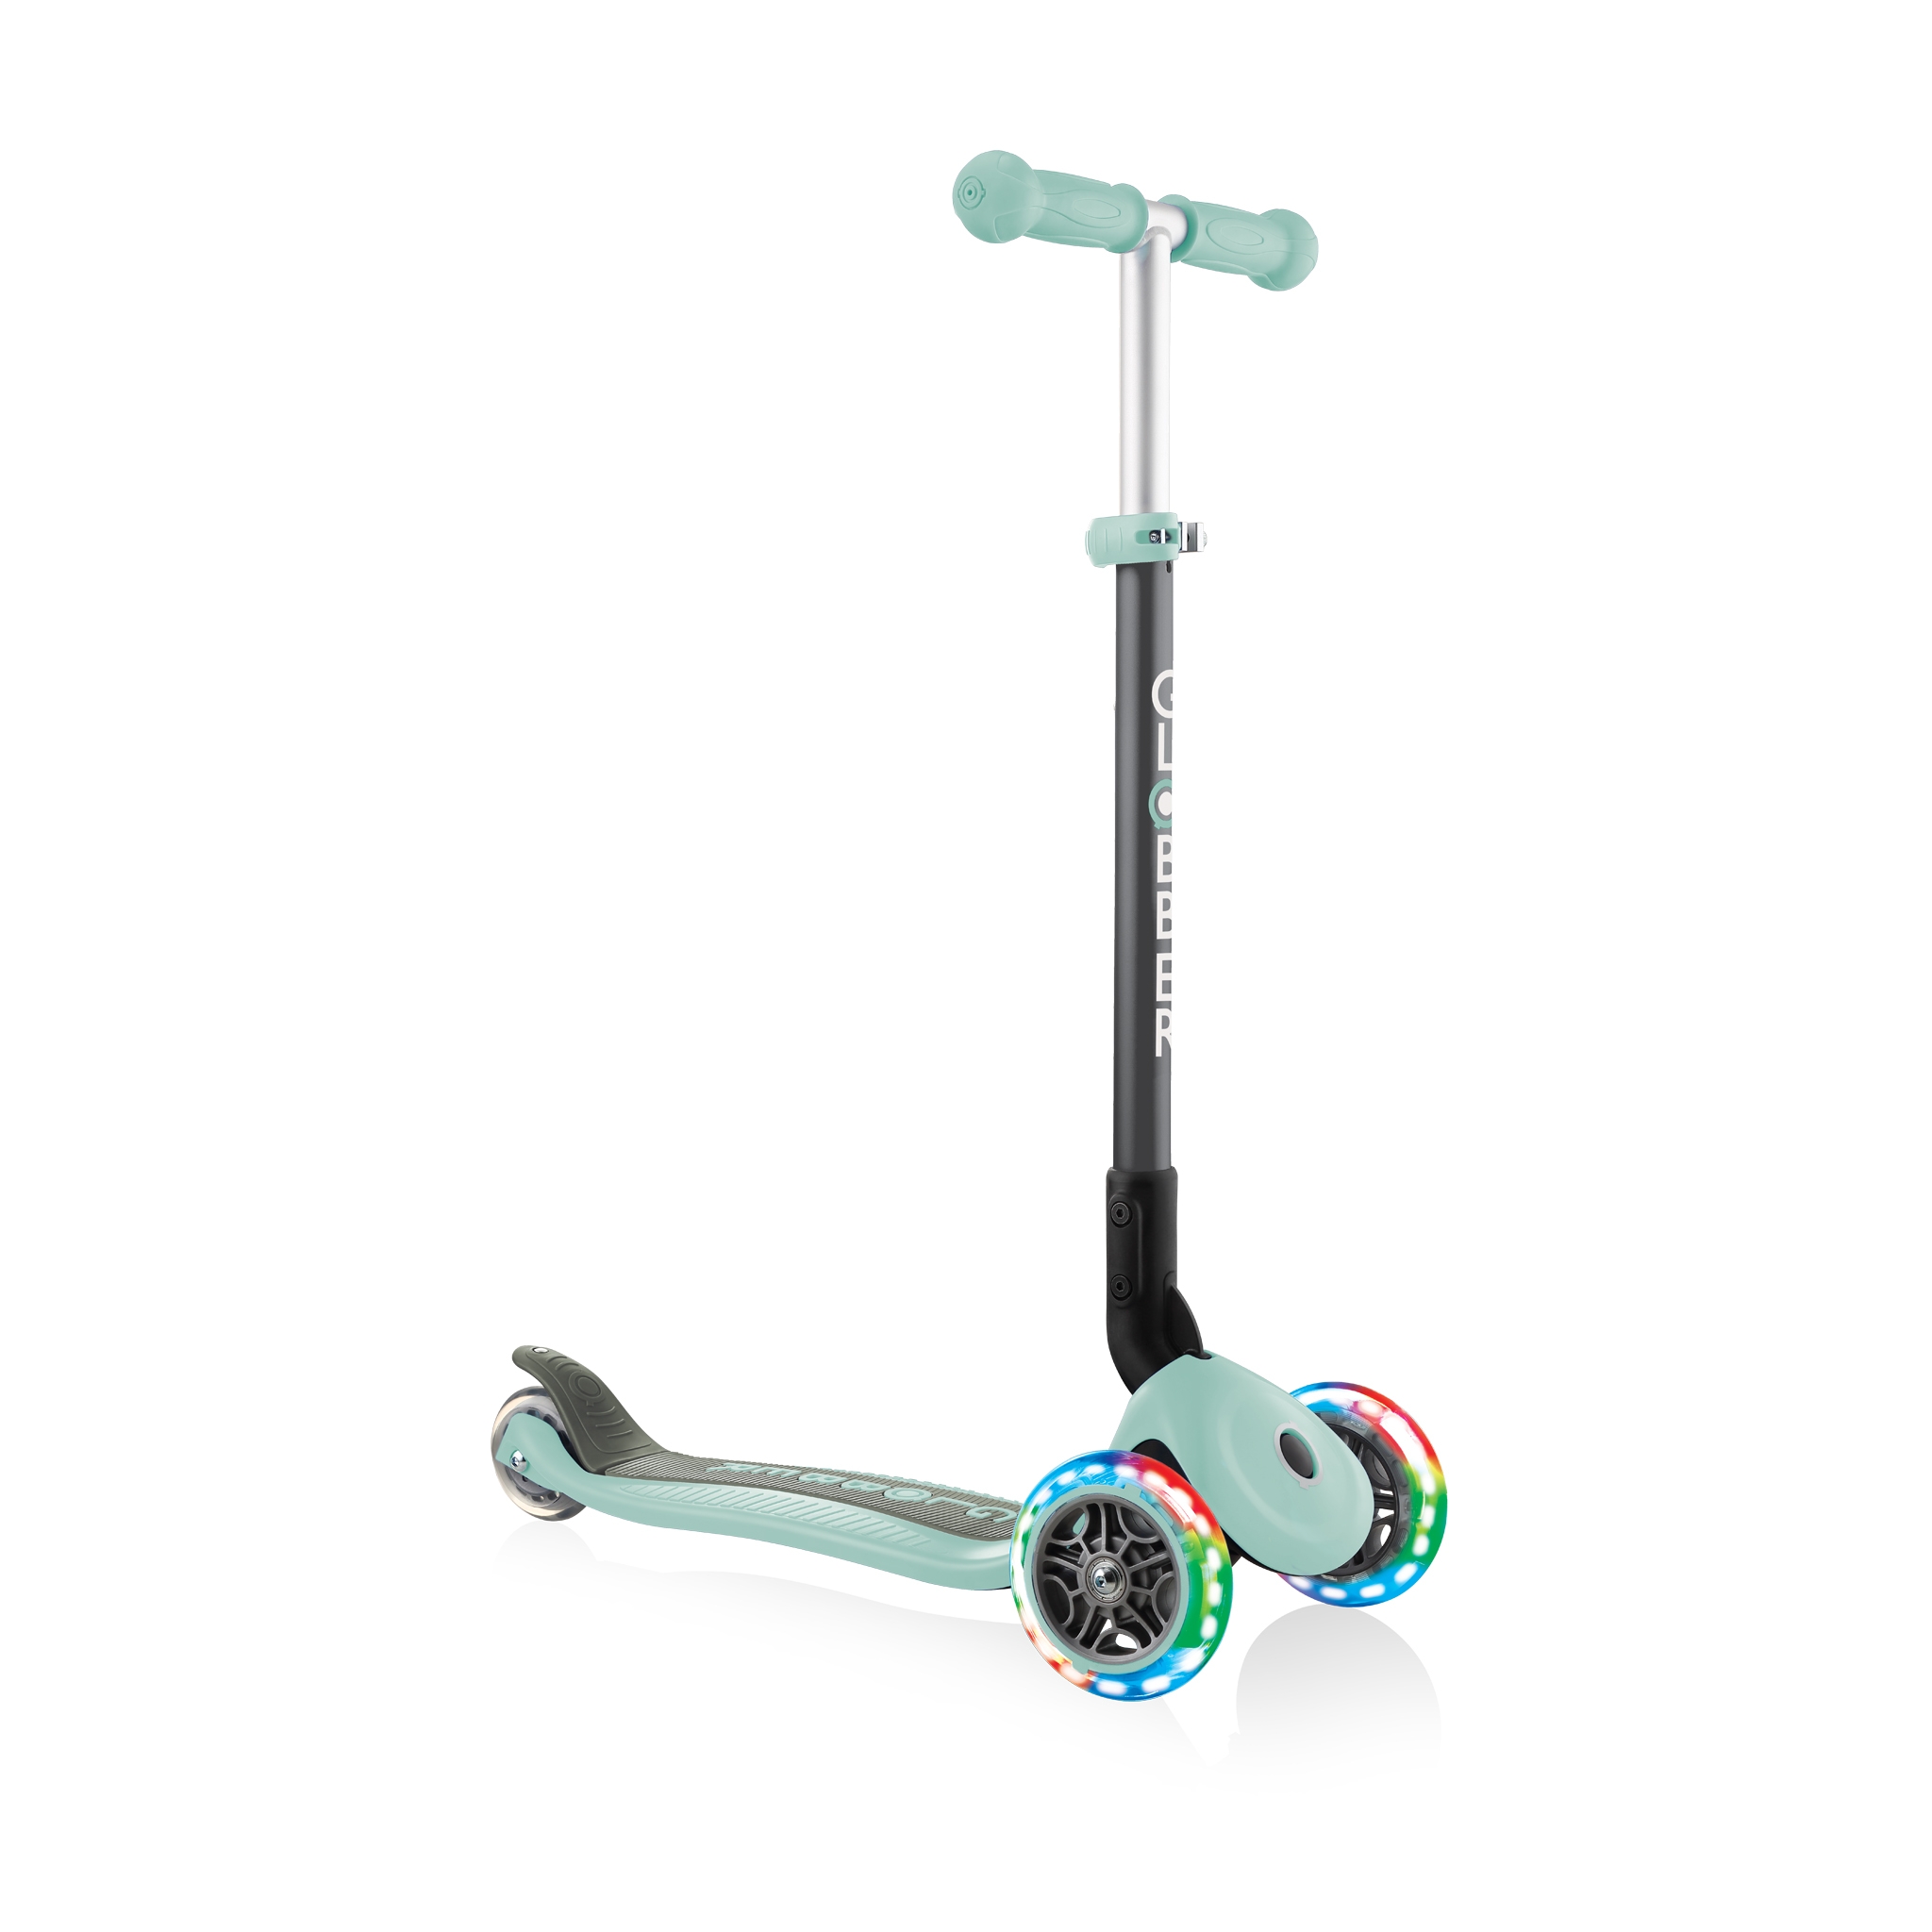 PRIMO-FOLDABLE-LIGHTS-3-wheel-foldable-scooter-light-up-scooter-for-kids 4